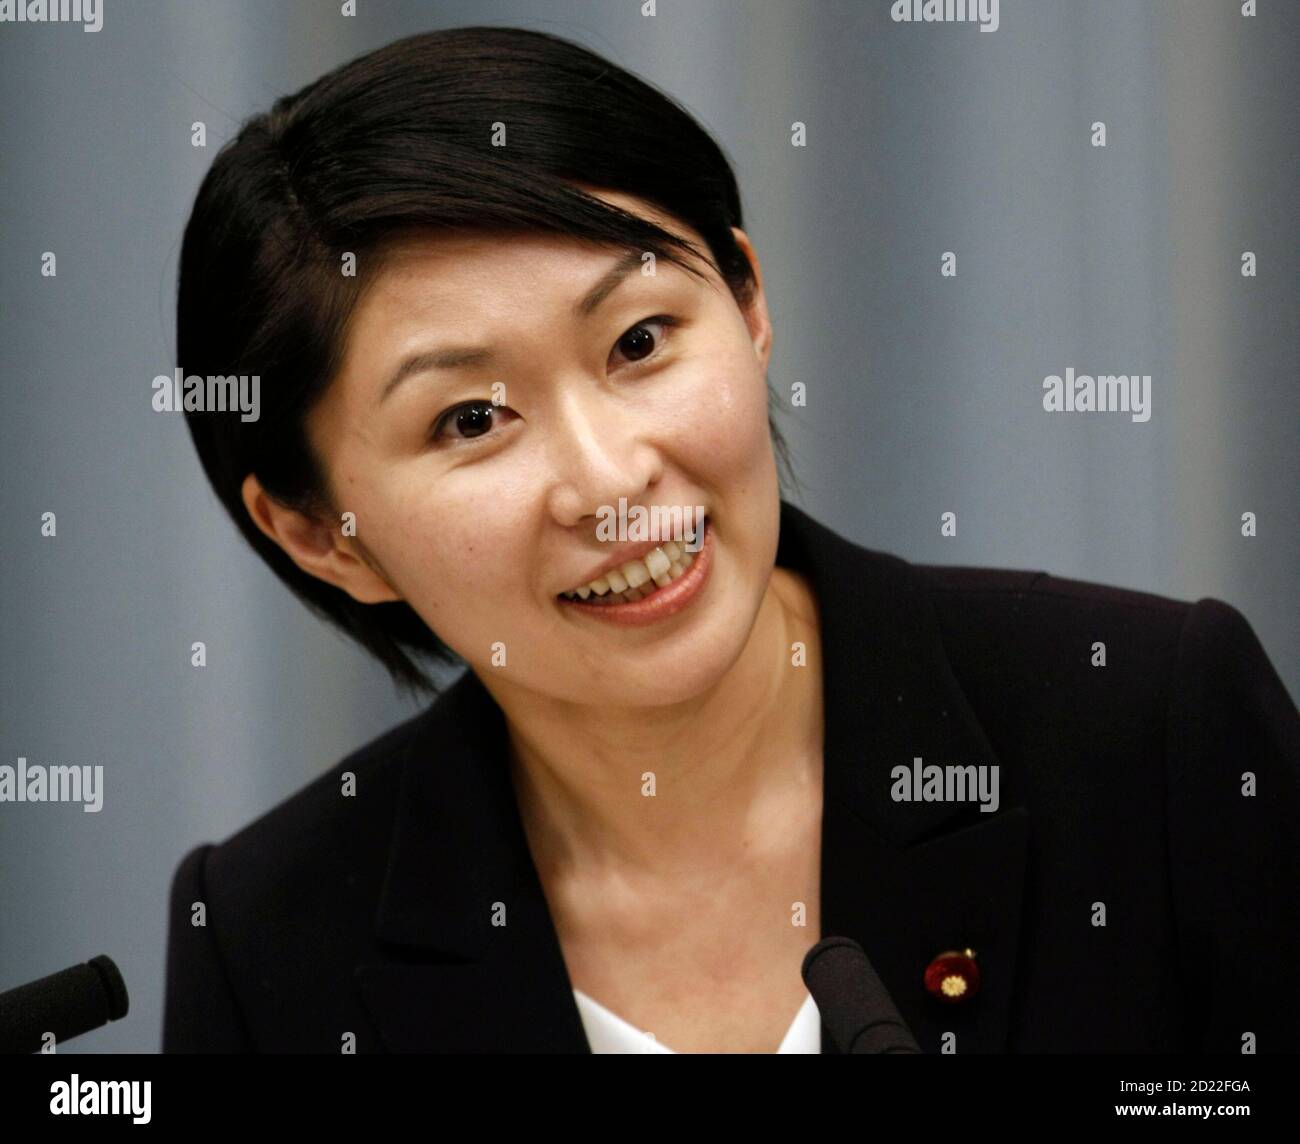 Japan's newly appointed Gender Issues Minister Yuko Obuchi speaks during a news conference at the prime minister's official residence in Tokyo September 24, 2008.   REUTERS/Toru Hanai (JAPAN) Stock Photo